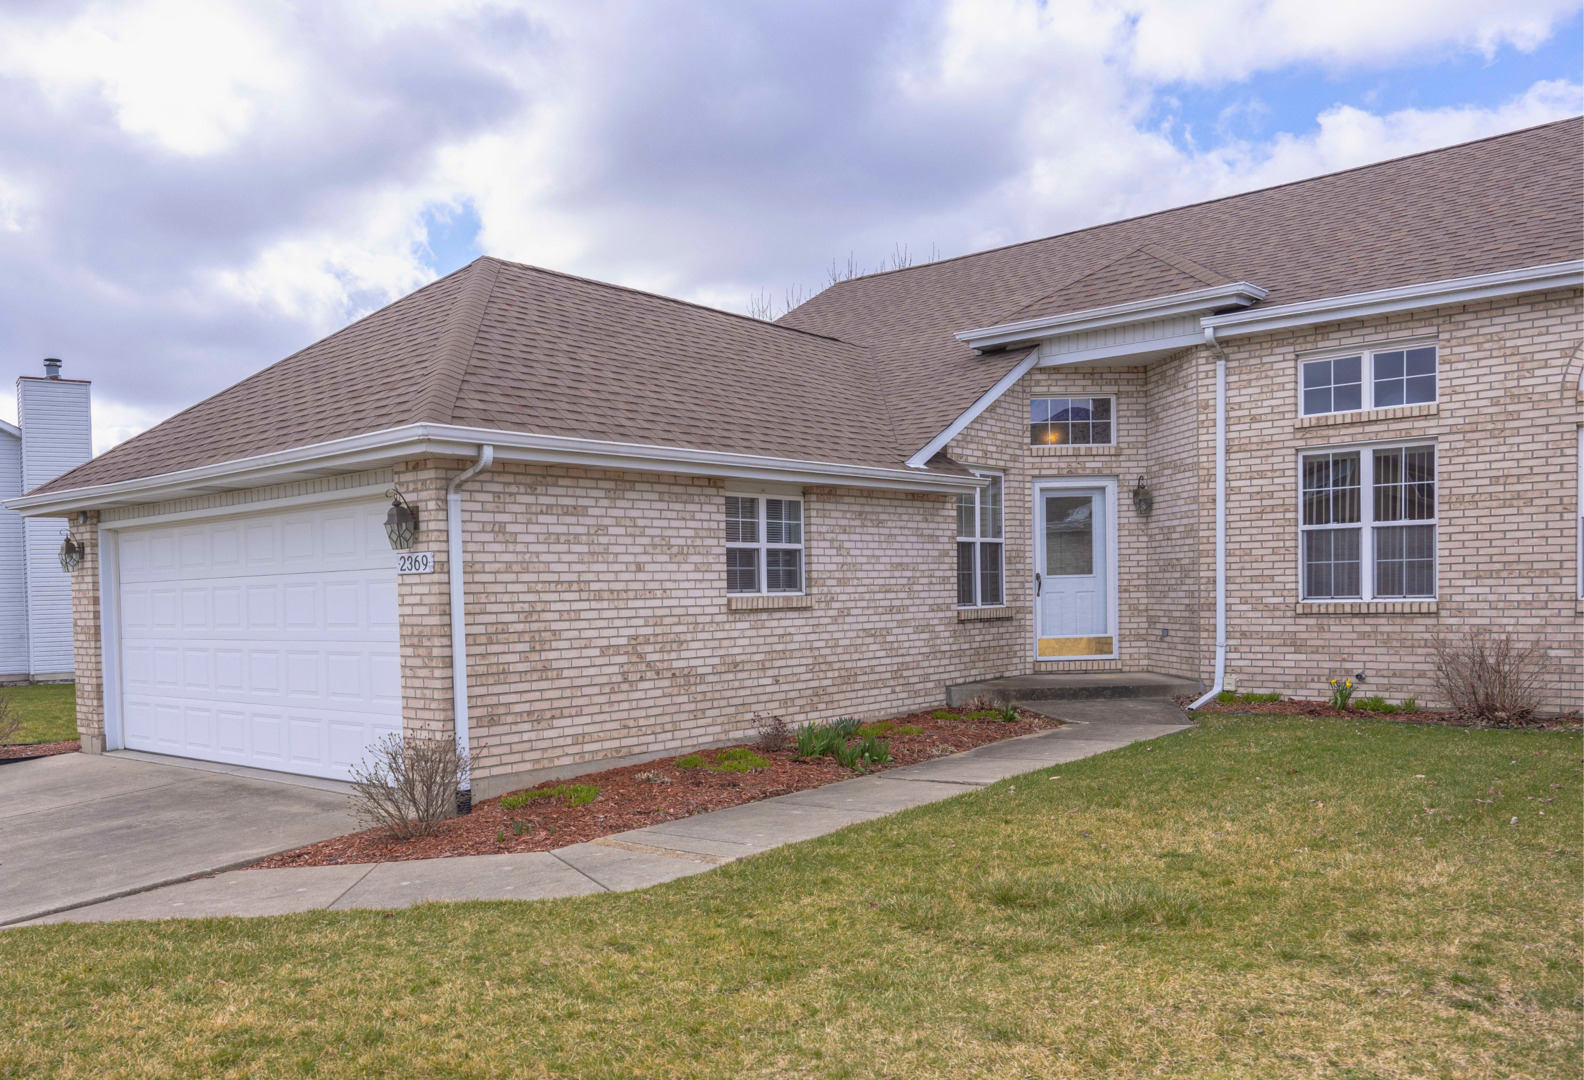 View Crest Hill, IL 60403 townhome